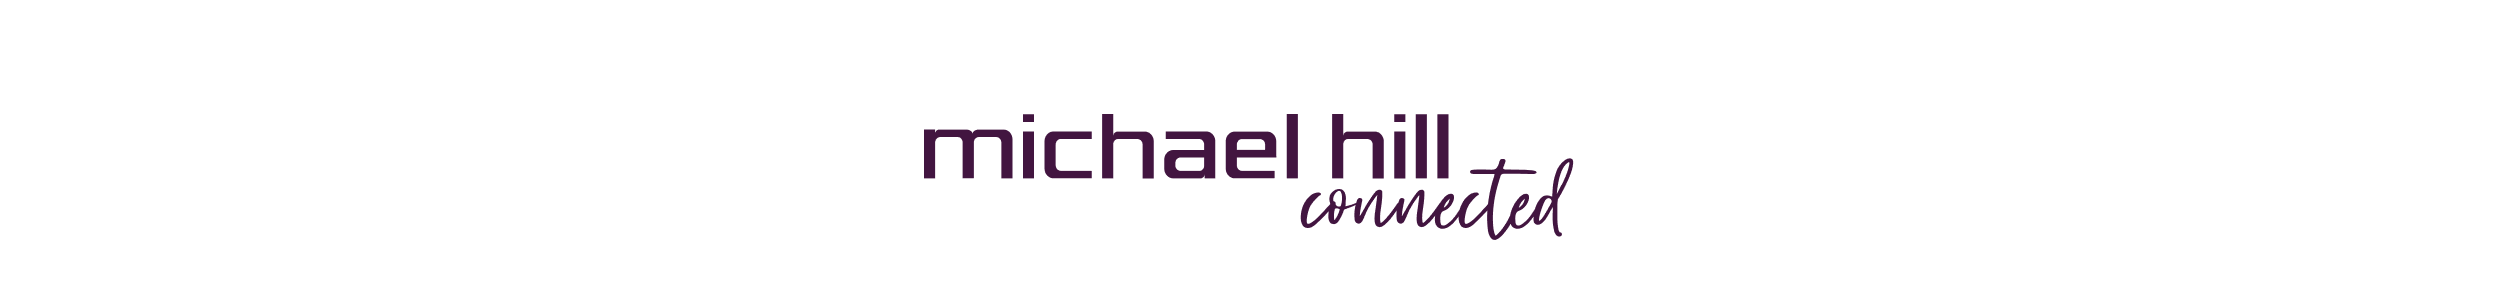 Michael Hill Connected logo